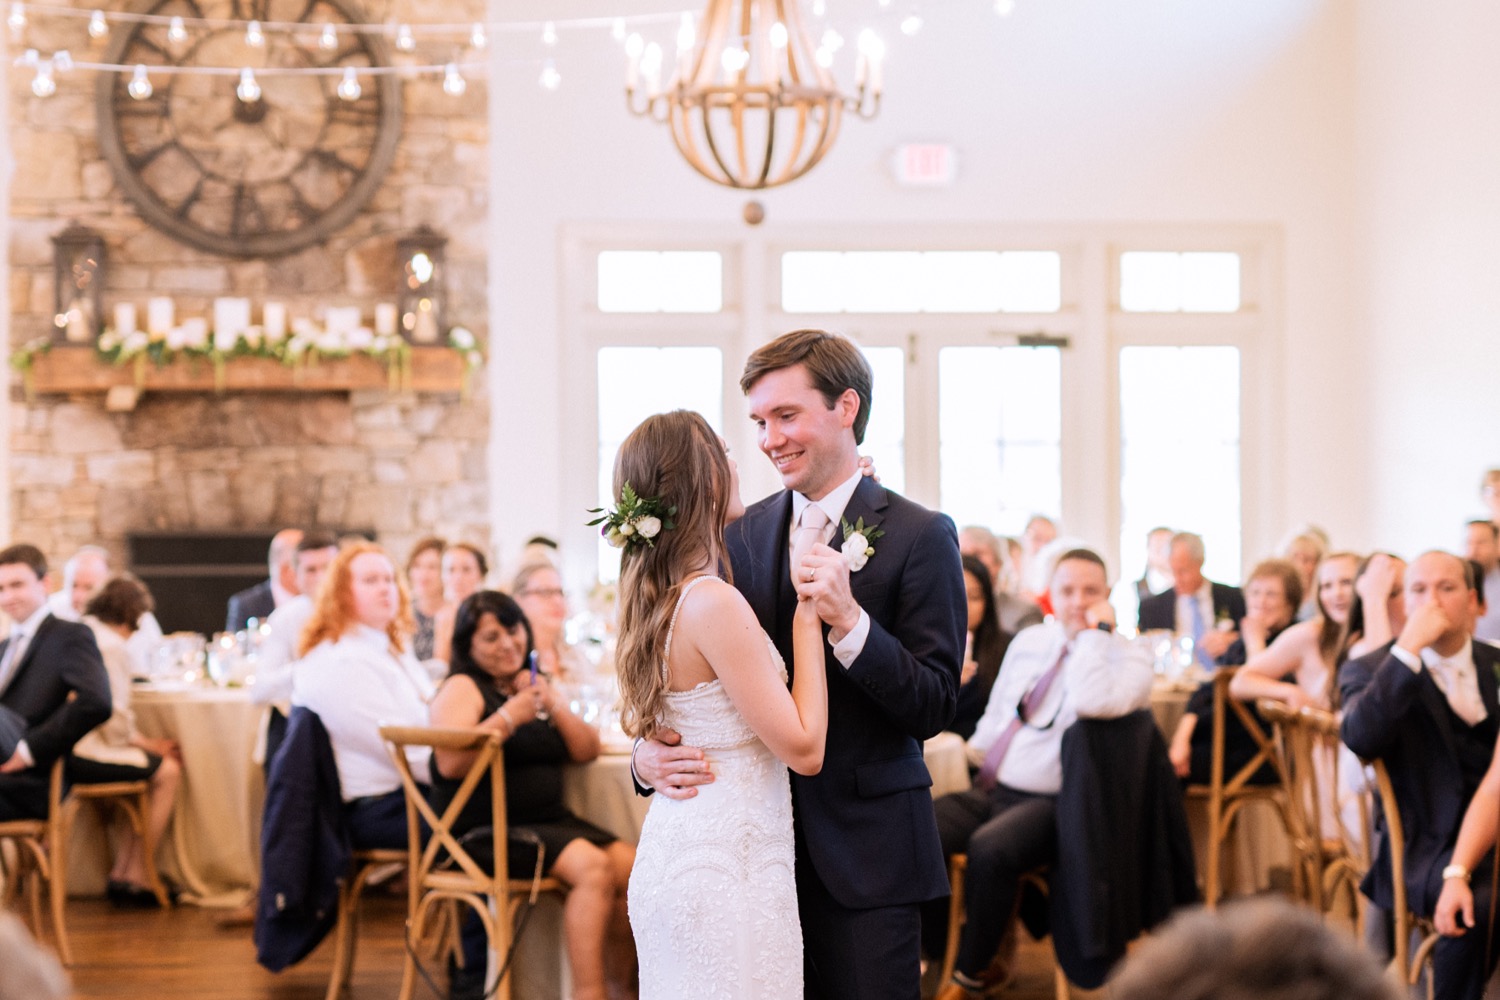 Bride and groom share first dance during their wedding reception in Charlottesville, VA